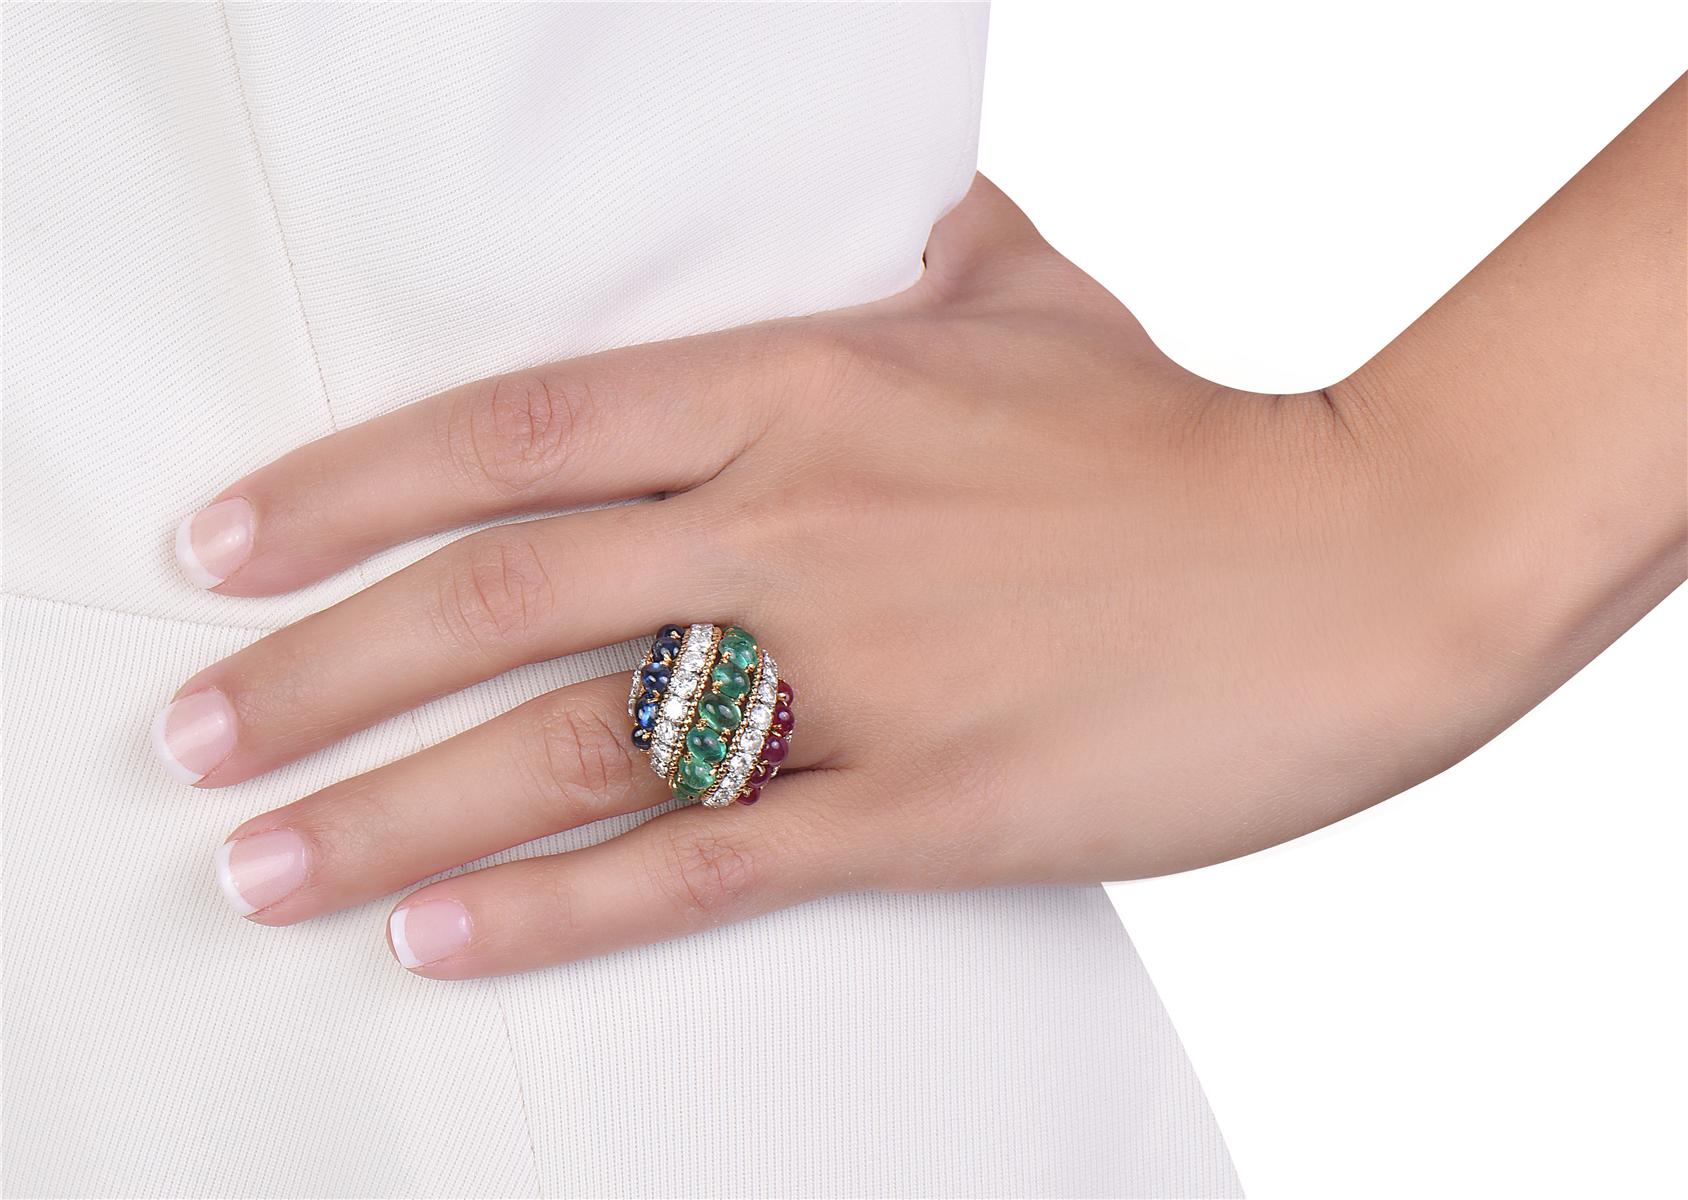 This 1960 circa Van Cleef & Arpels cocktail ring features 36 round brilliant cut diamonds weighing approximately 3.15 carats total, five oval cabochon rubies, six oval cabochon sapphires, and nine oval cabochon green emeralds set in 18K yellow gold